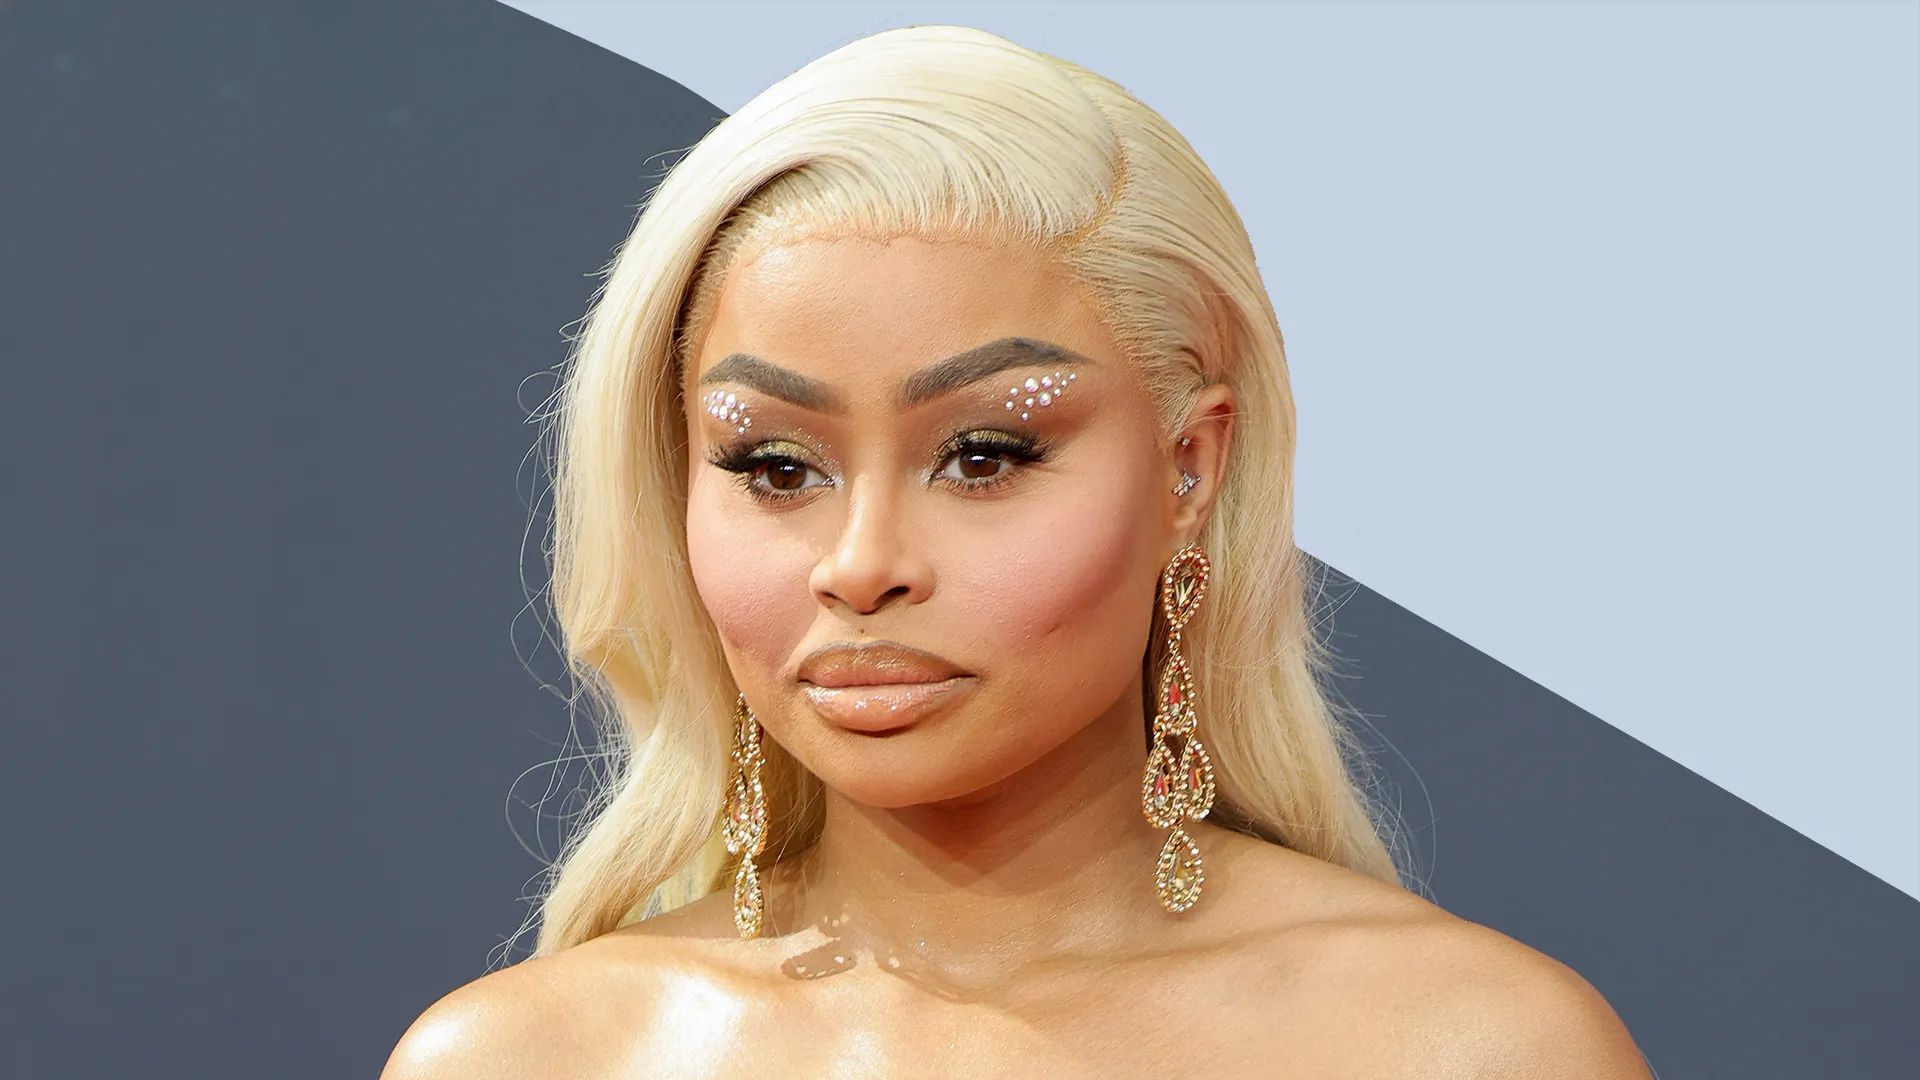 Blac Chyna Reveals Financial Struggles And Seeks Support From Tyga For Custody Battle